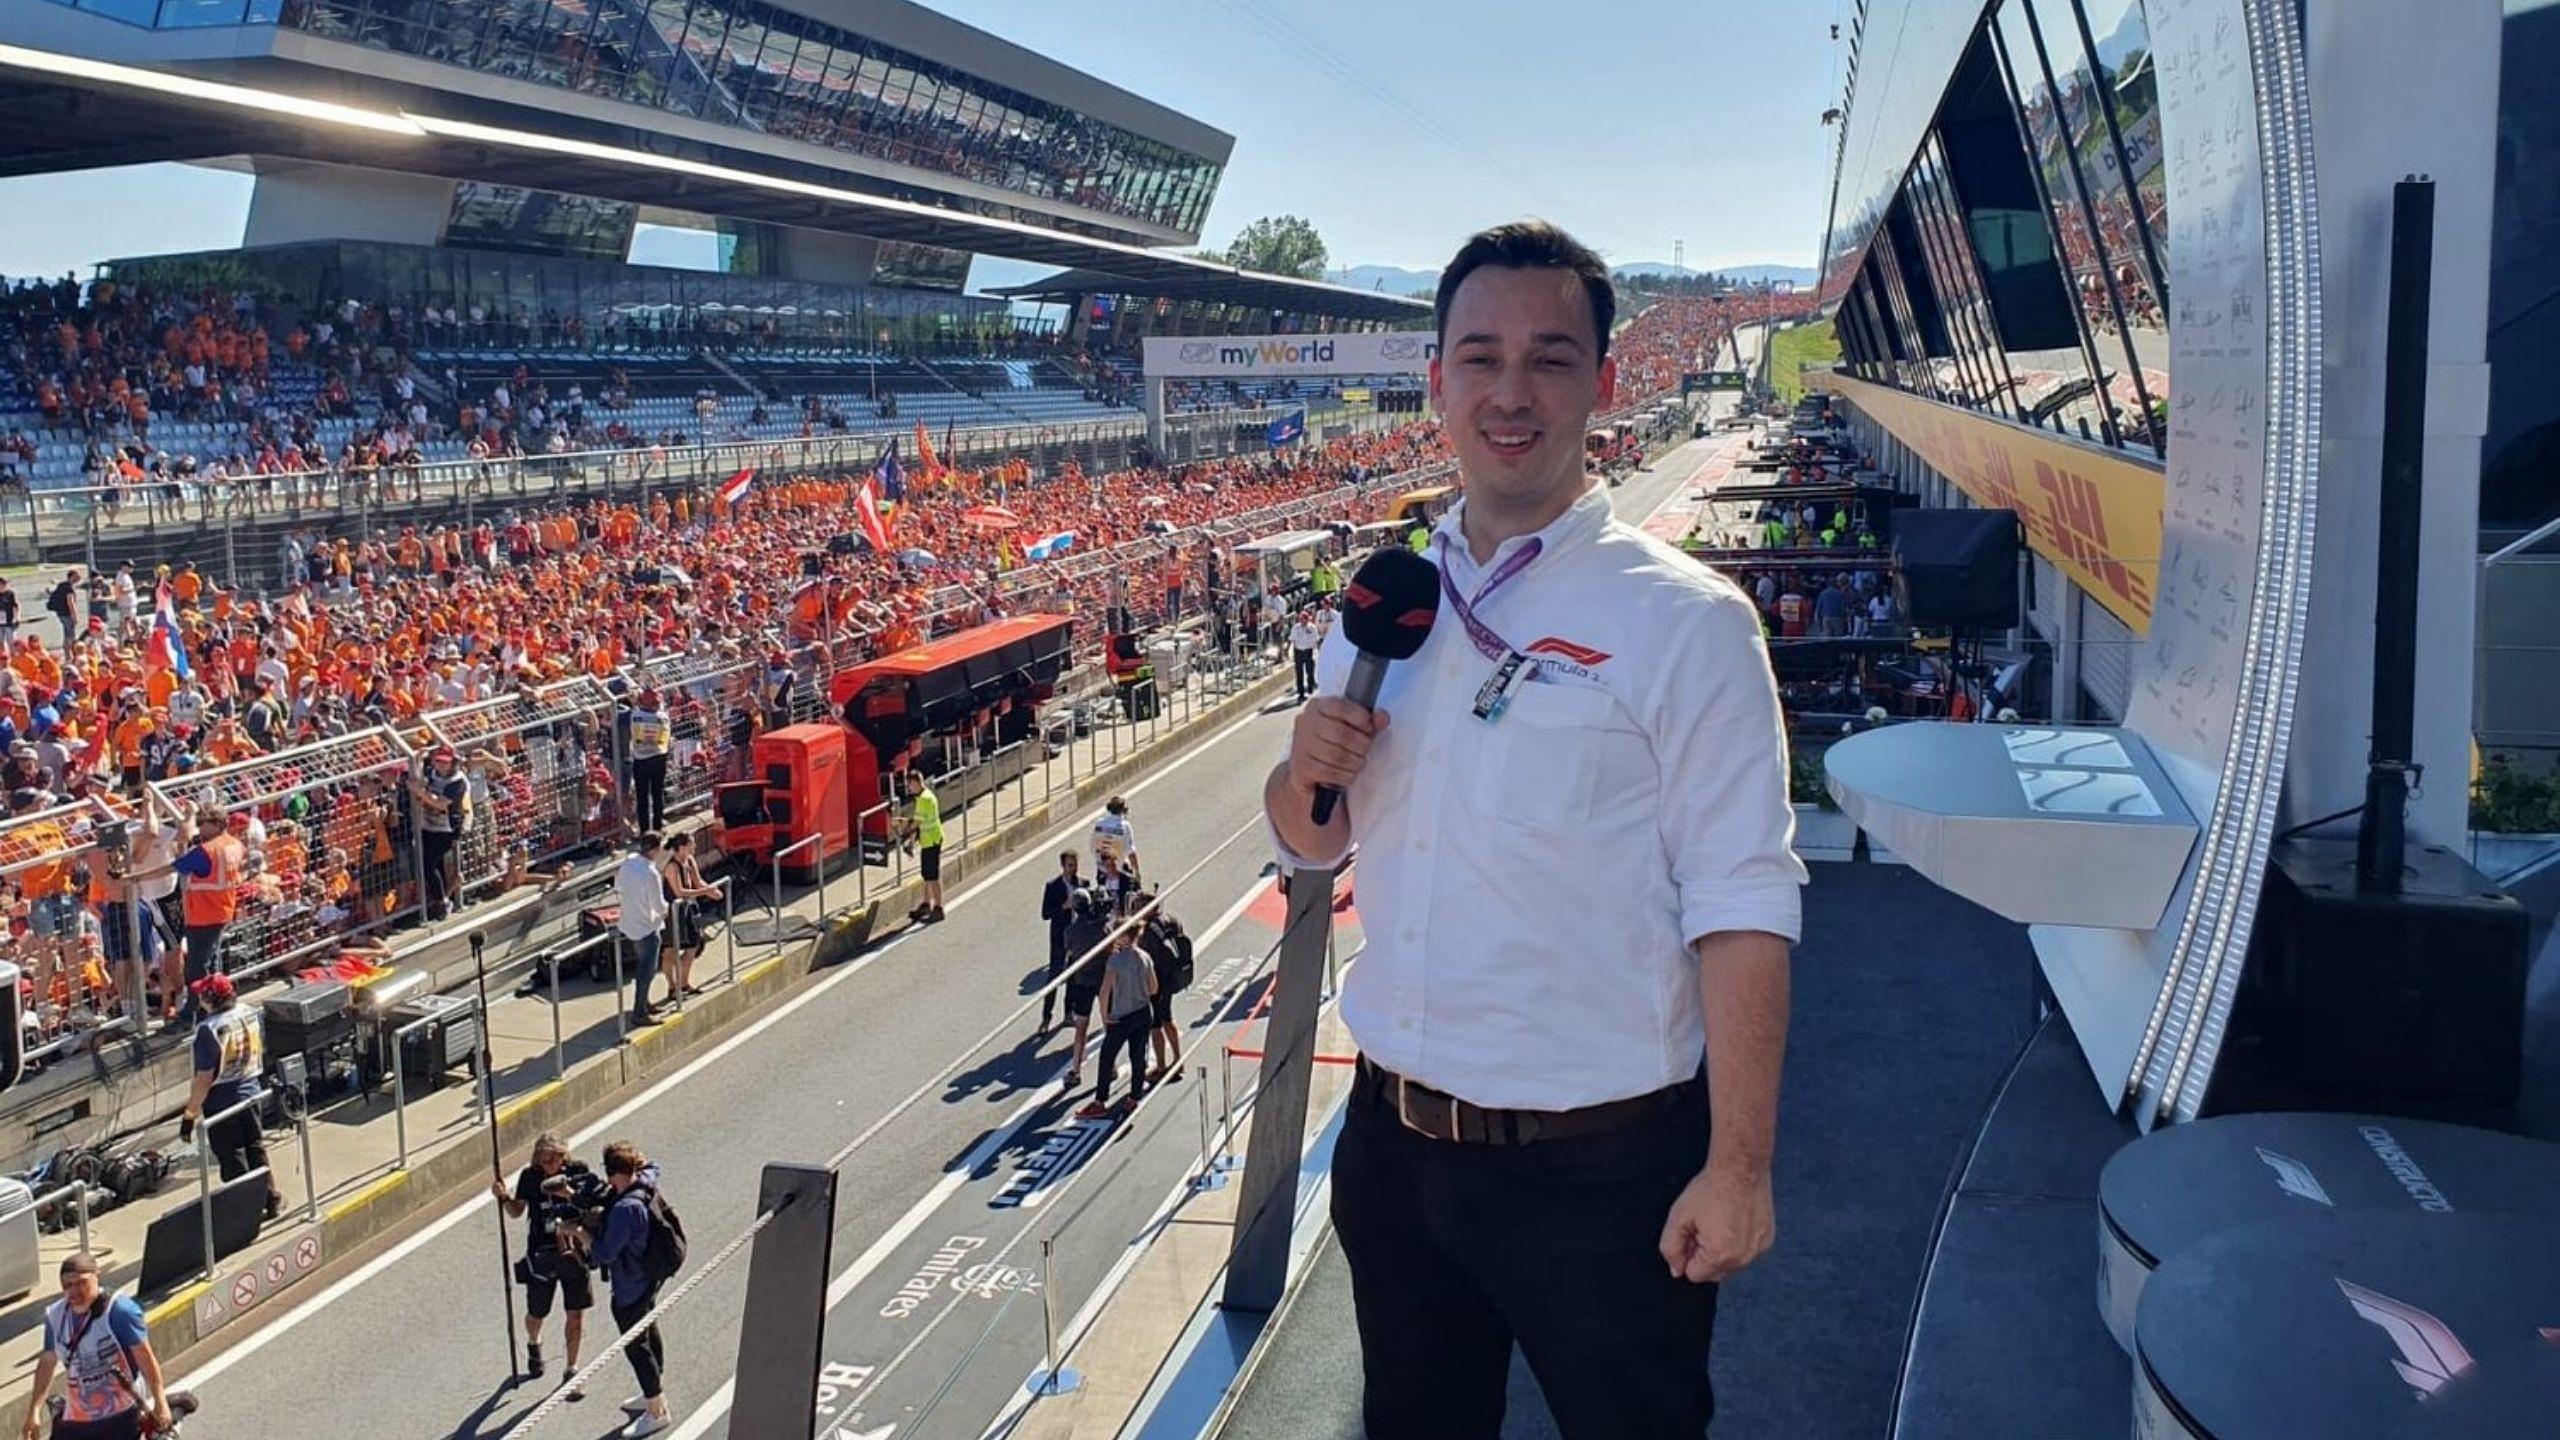 Channel 4 announces Alex Jacques as the new lead F1 commentator for the 2021 season, will replace Ben Edwards